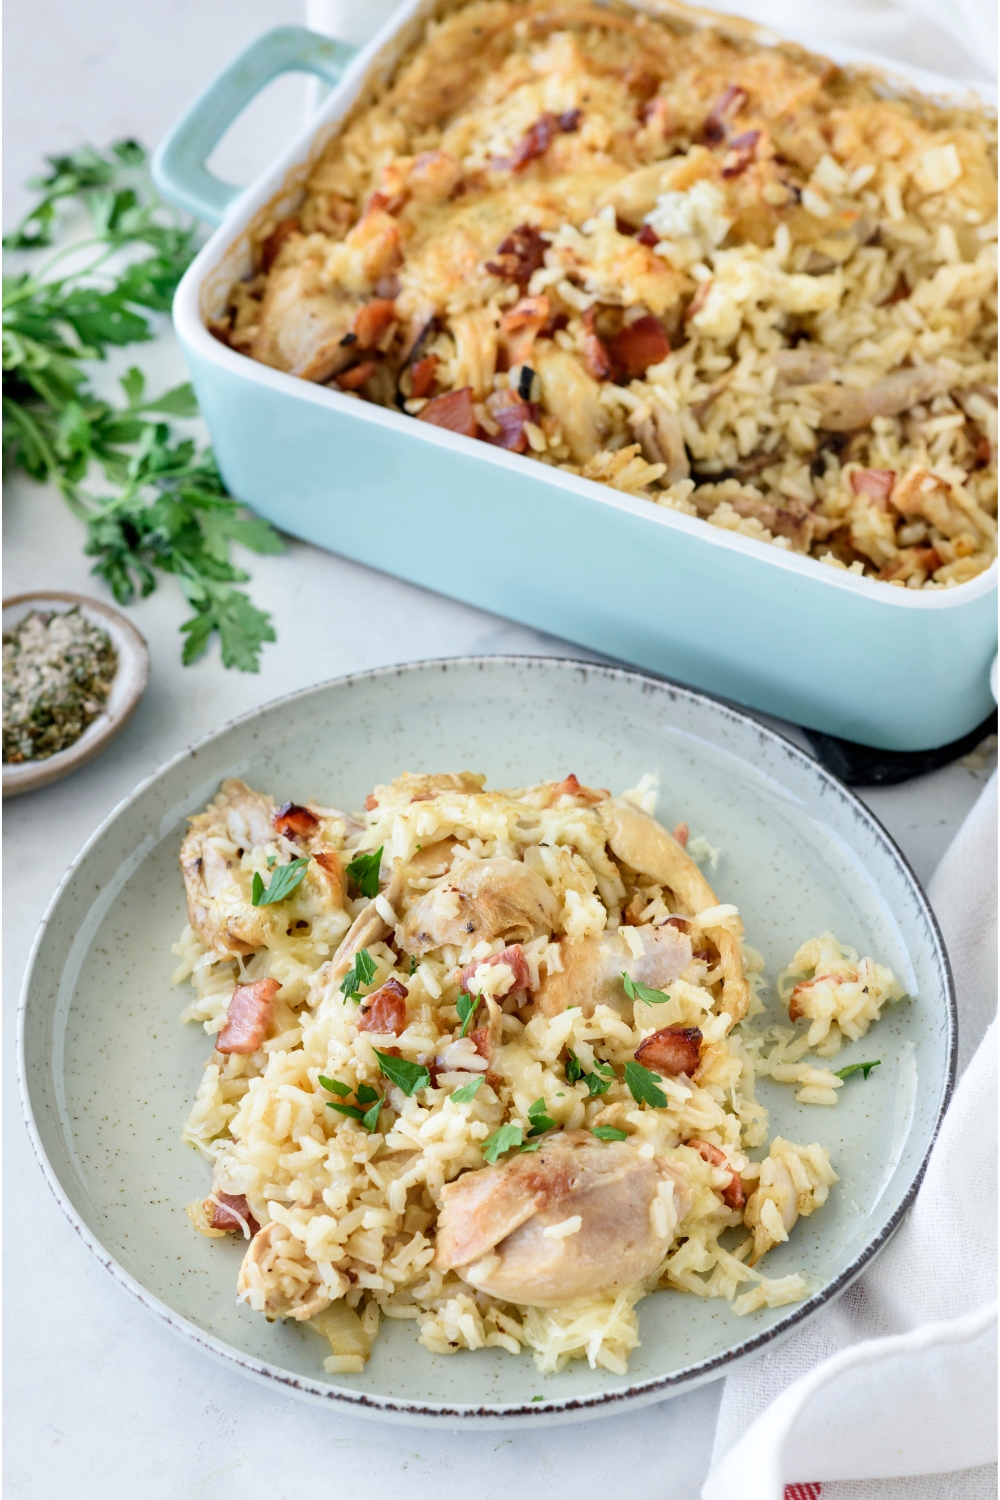 A heaping plate of chicken bacon and rice casserole garnished with fresh green herbs next to a baking dish filled with the remainder of the casserole.